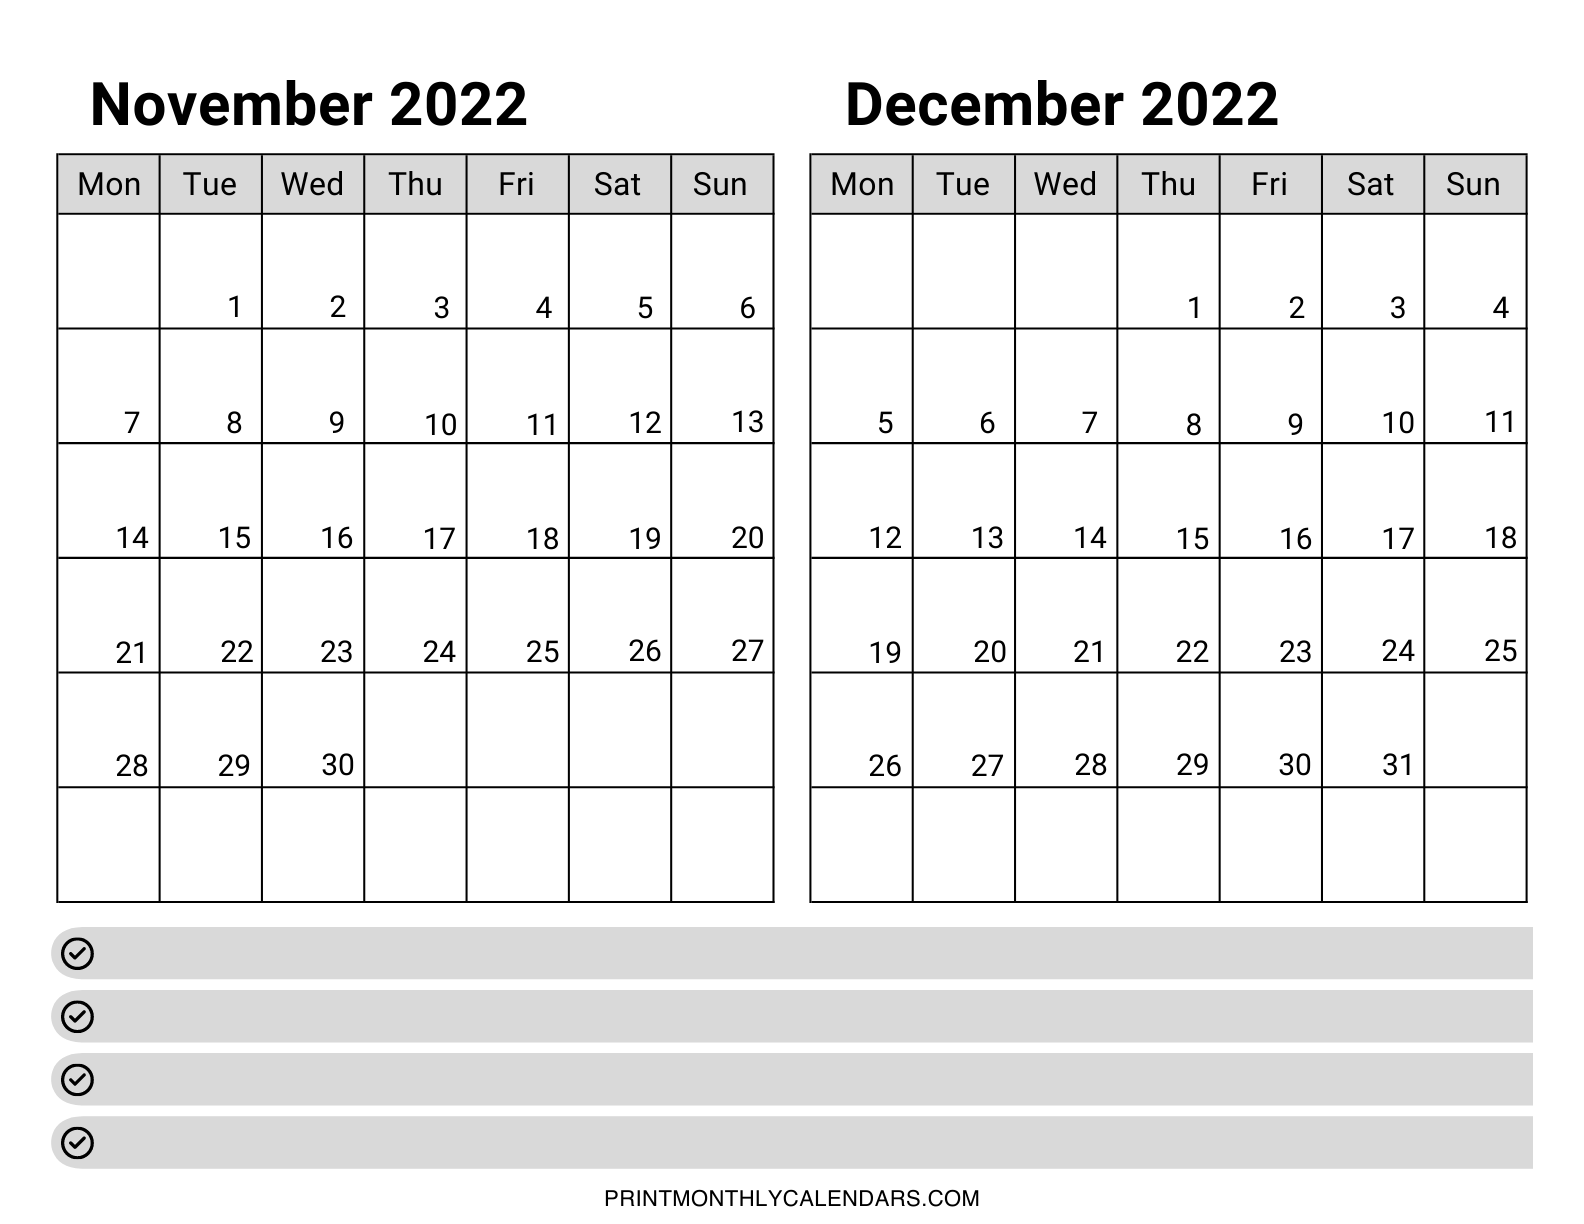 November and December 2022 calendar template has two month grids which are arranged in a landscape layout. Blank rows with checkboxes are provided at the bottom for writing down significant days, dates, events, and schedules.